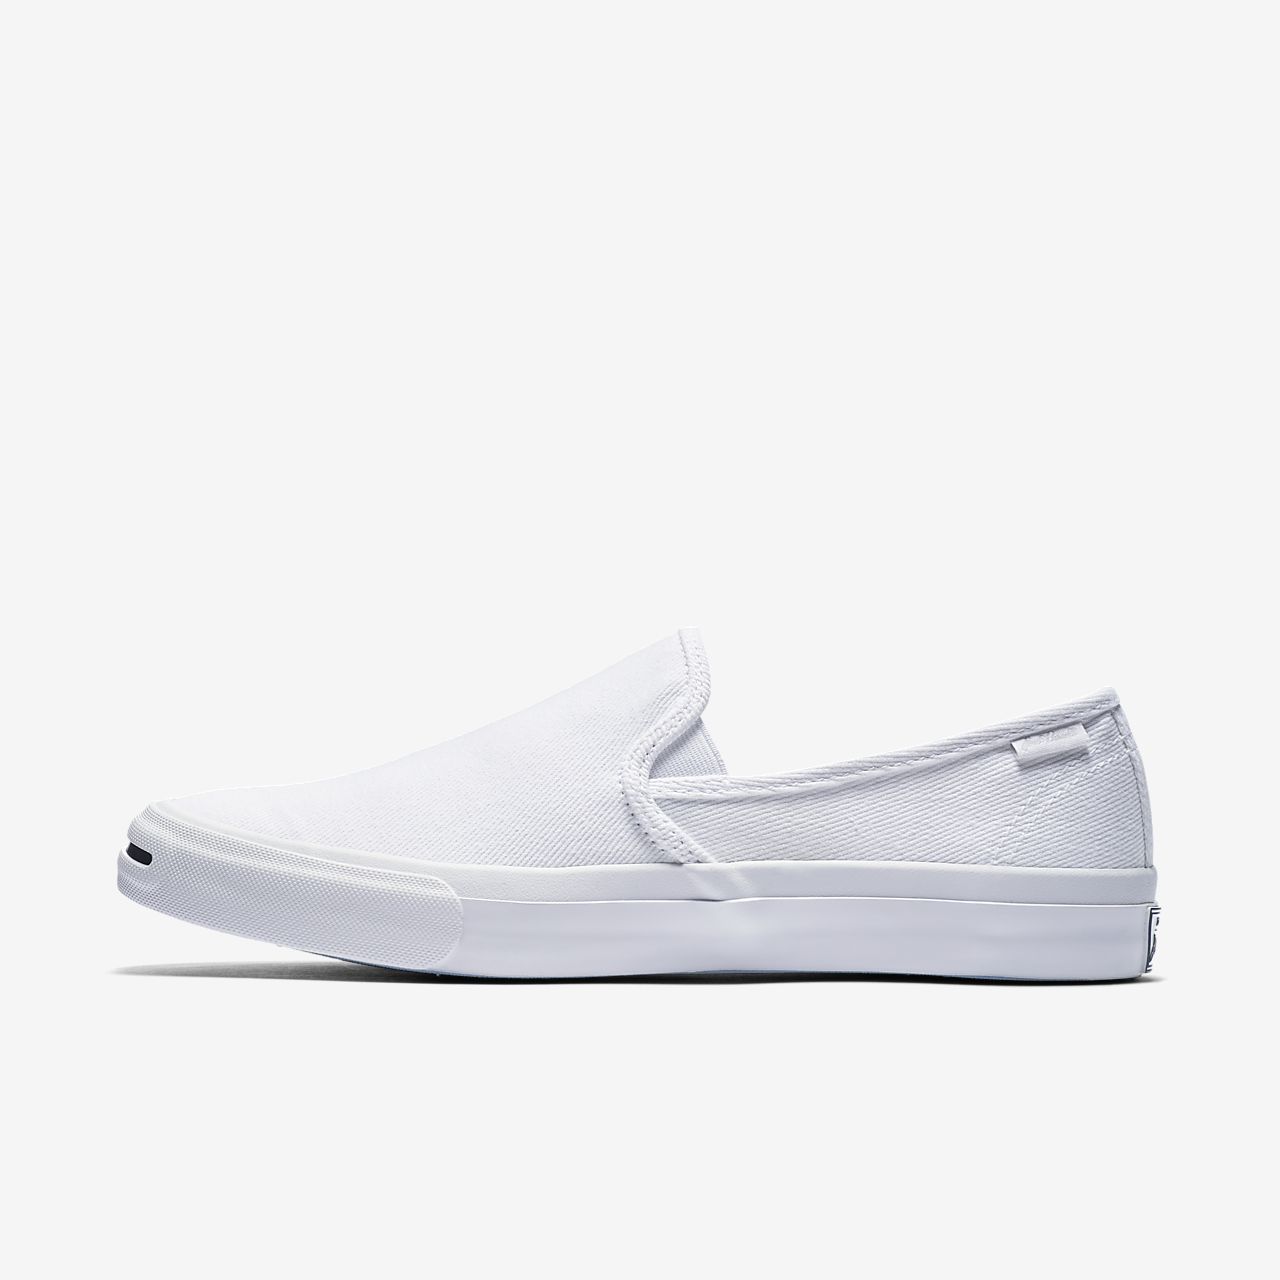 Converse Jack Purcell Low Profile Slip-On Unisex Shoe ...